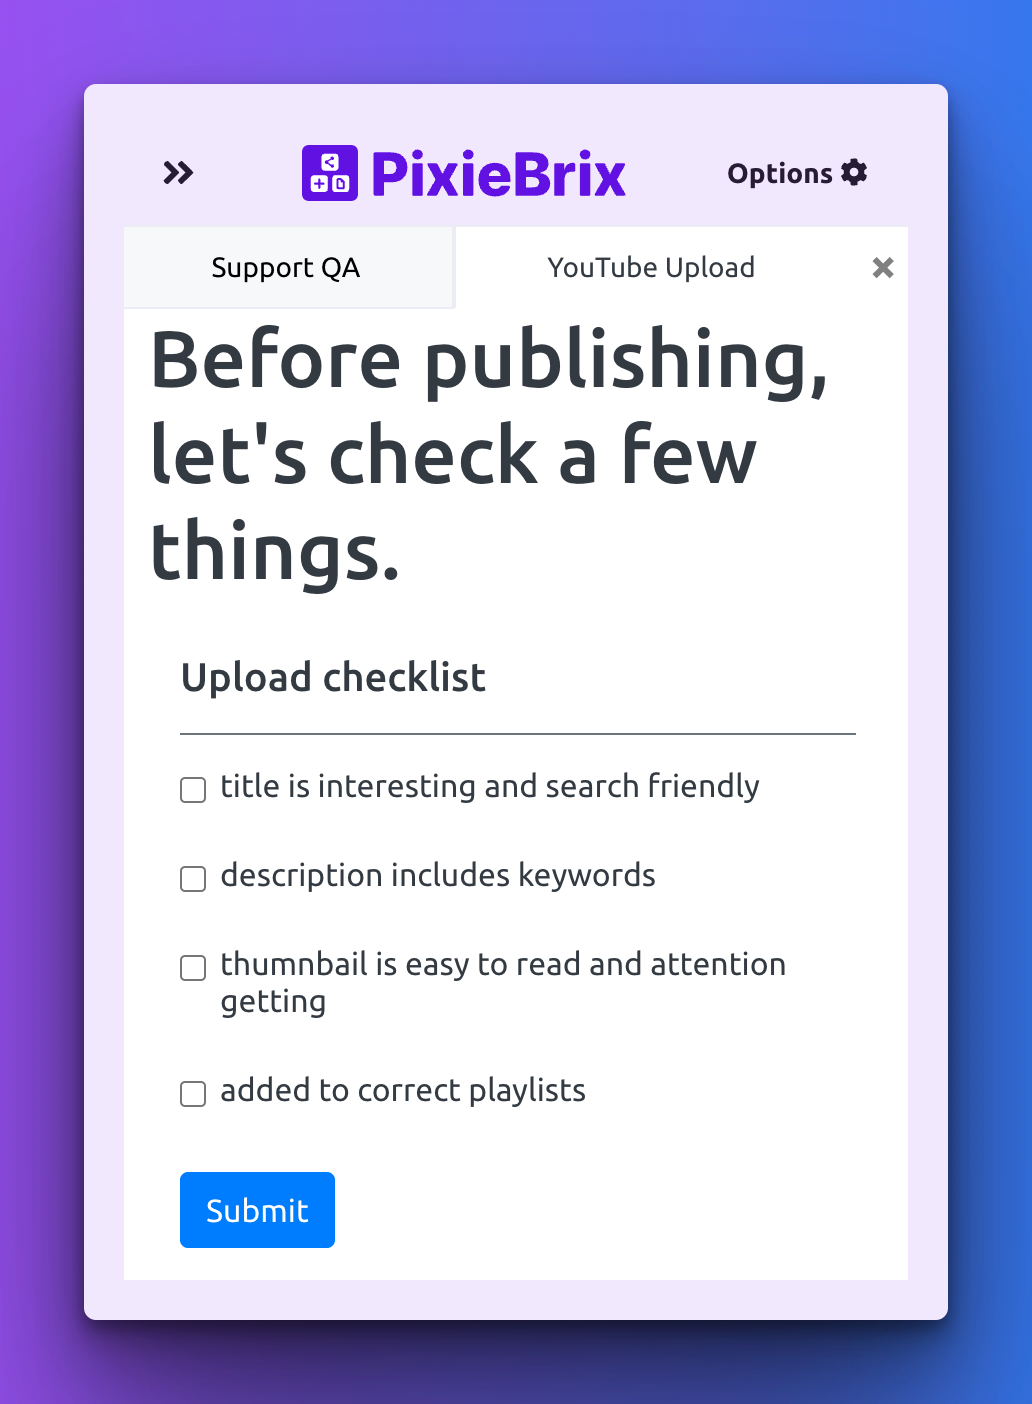 A task checklist for optimizing a YouTube video before publishing, built with PixieBrix.